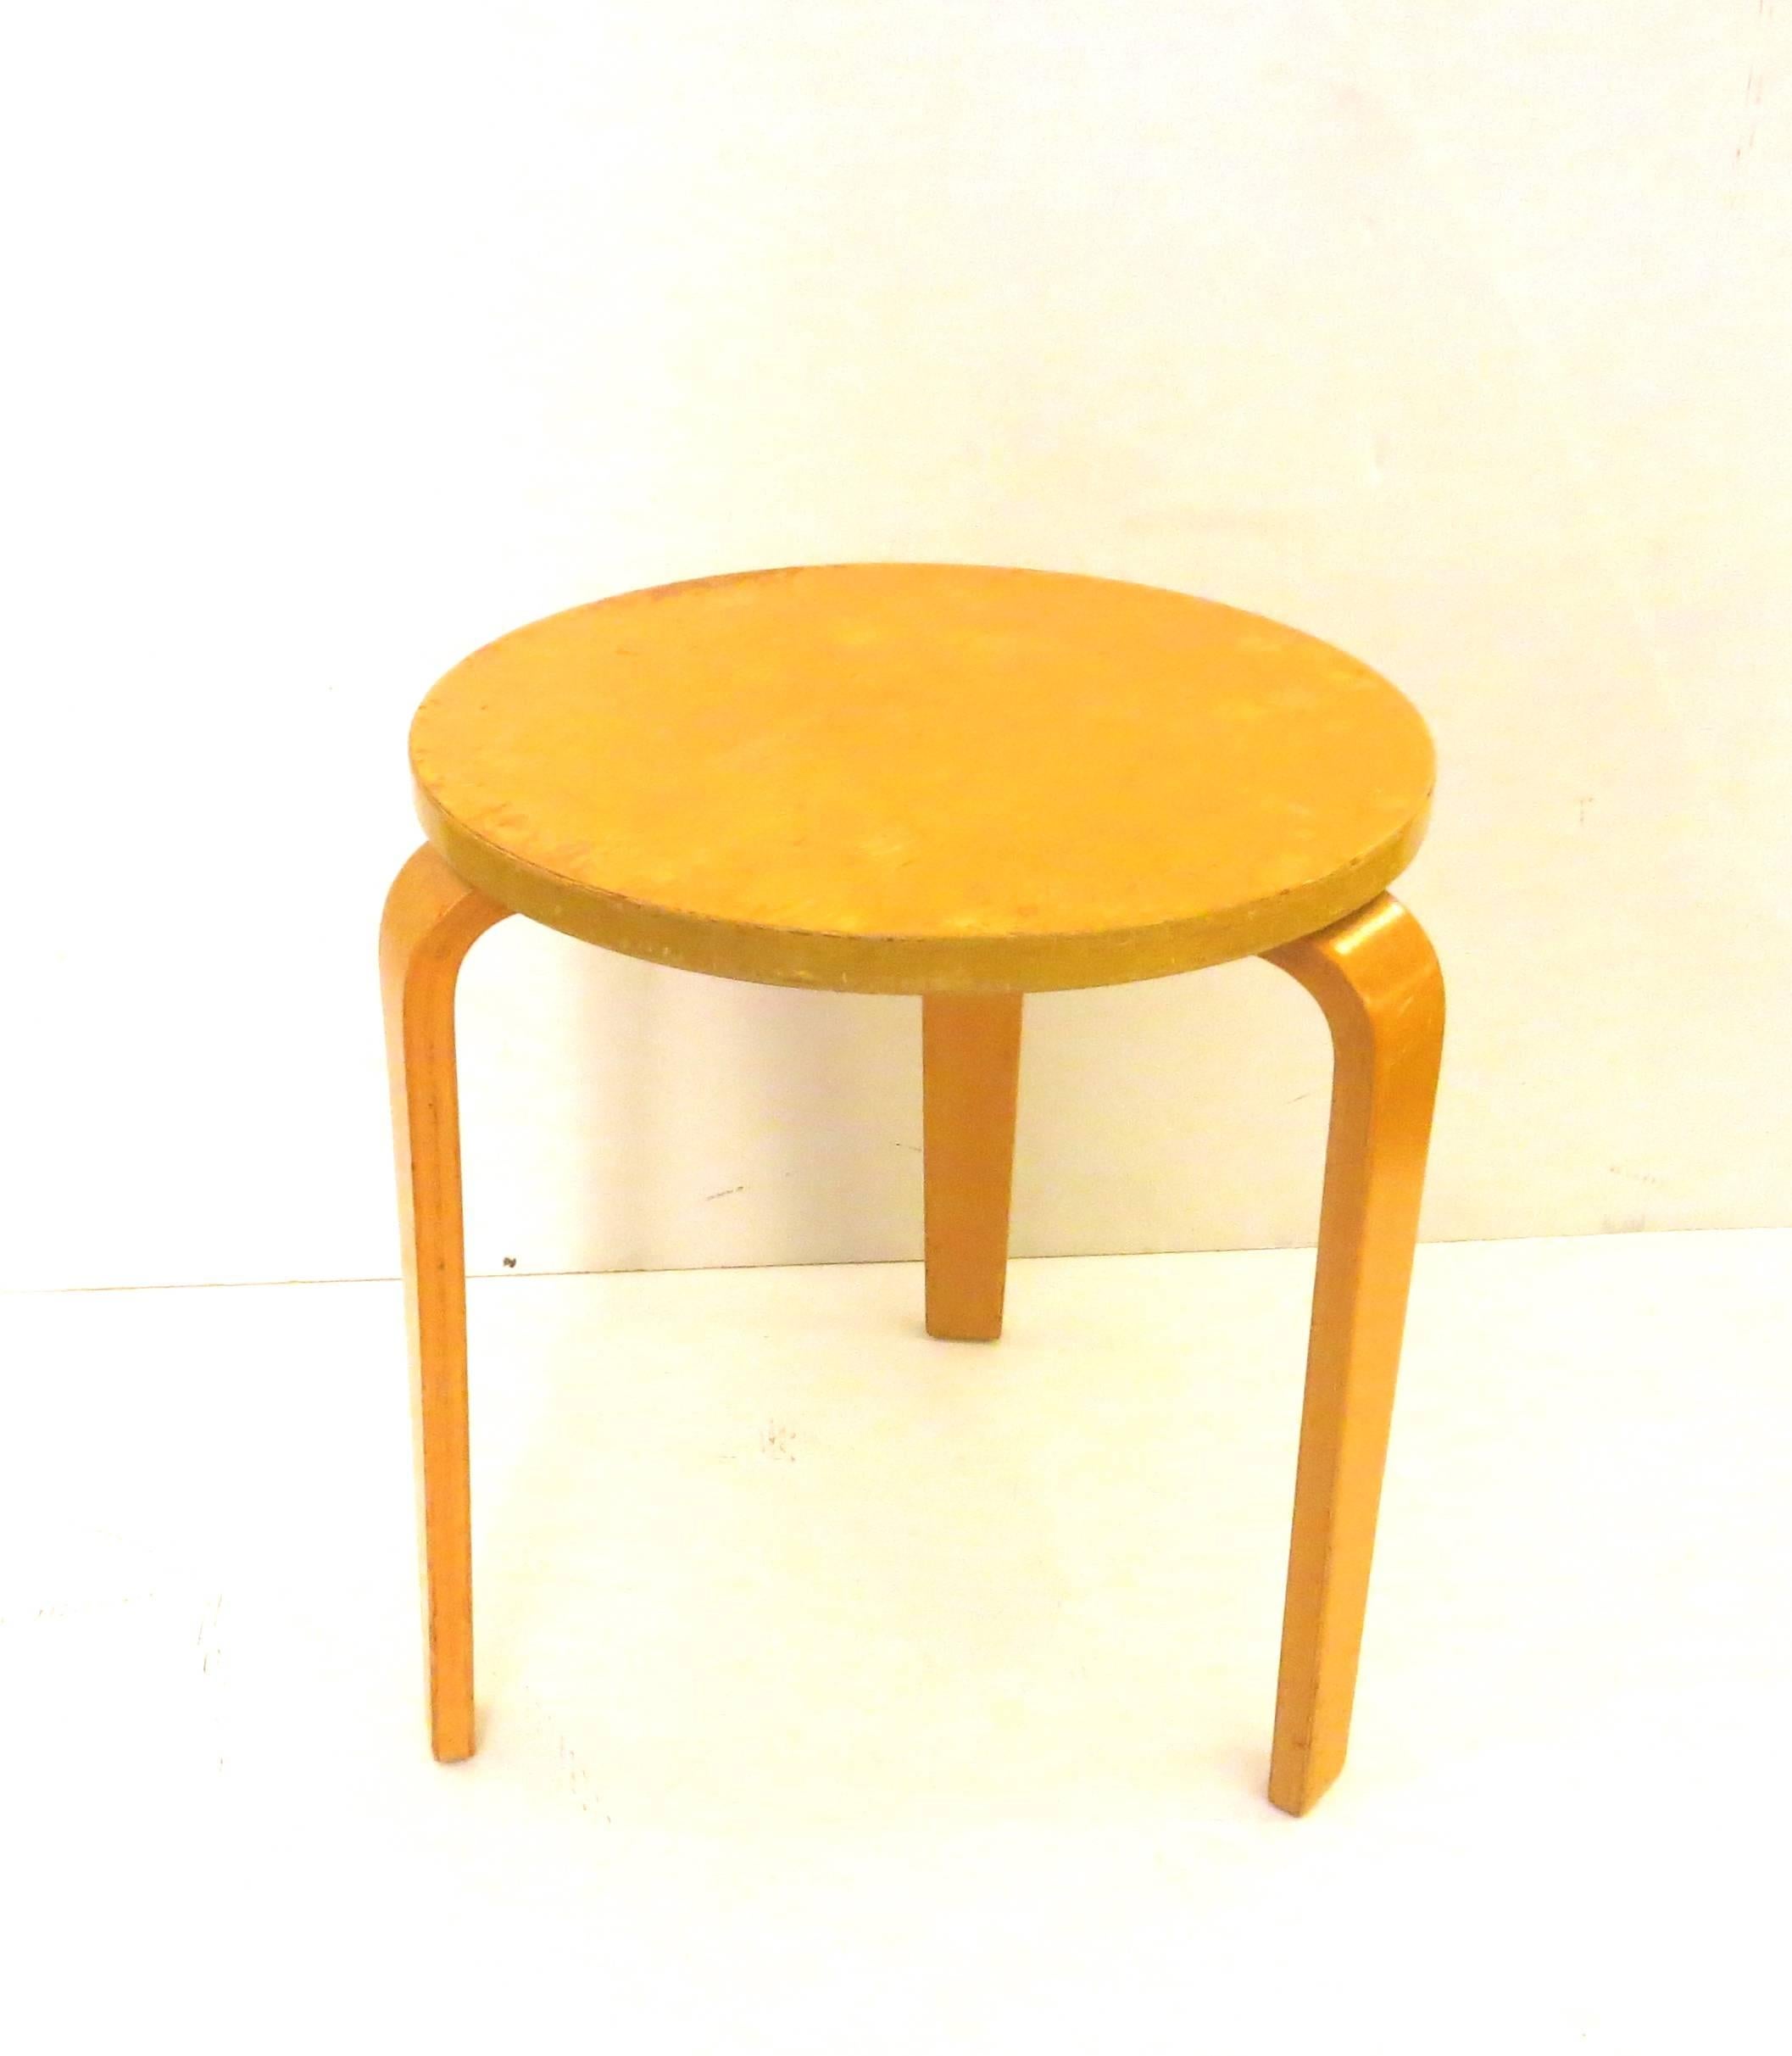 Laminated bentwood legs. Designed by Alvar Aalto in 1933, this design was original created for the Paimio Sanatorium but was later added to Aalto’s permanent furniture collection. Made in Finland by Artek. this one shows no stamp or label, the